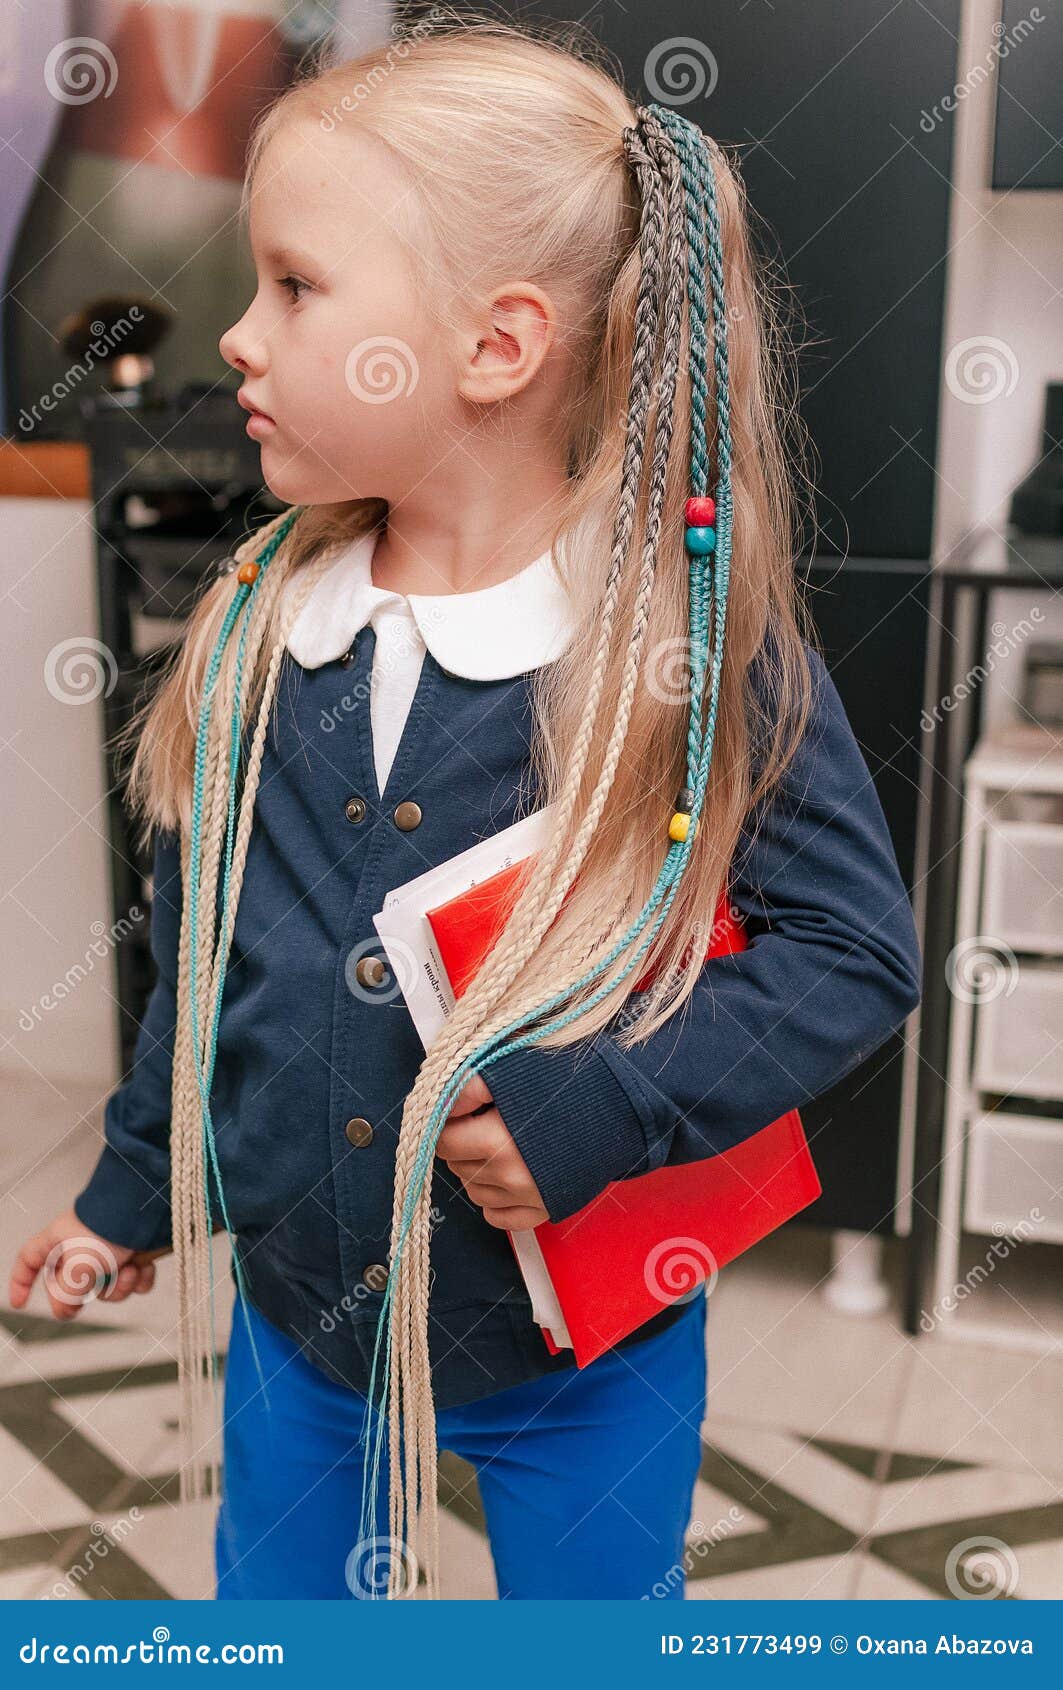 Hairstyle with Braids for a Schoolgirl Girl Stock Image - Image of  colorful, child: 231773499